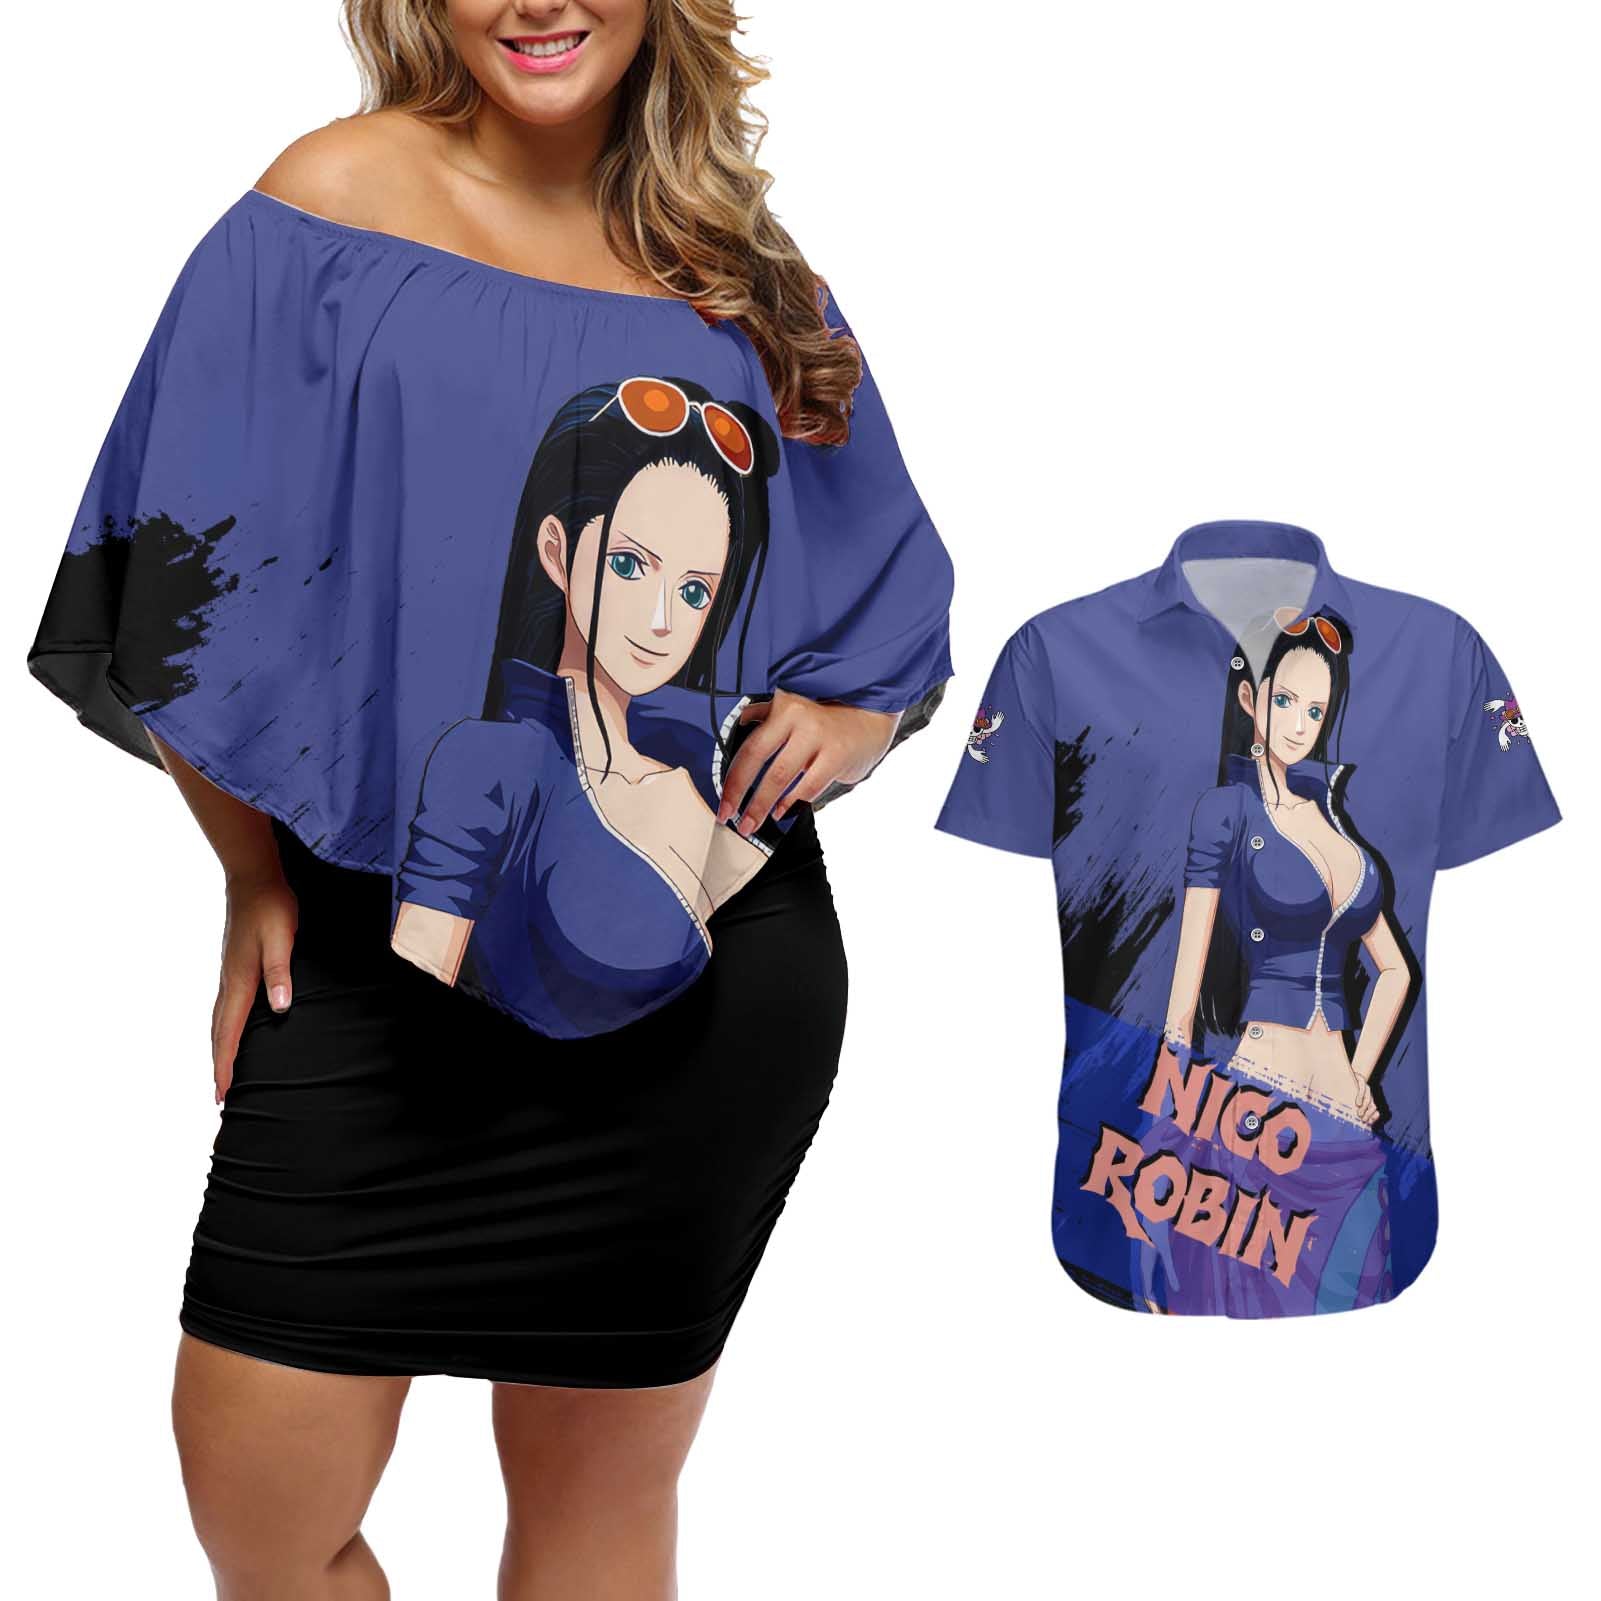 Nico Robin - One Piece Couples Matching Off Shoulder Short Dress and Hawaiian Shirt Anime Style